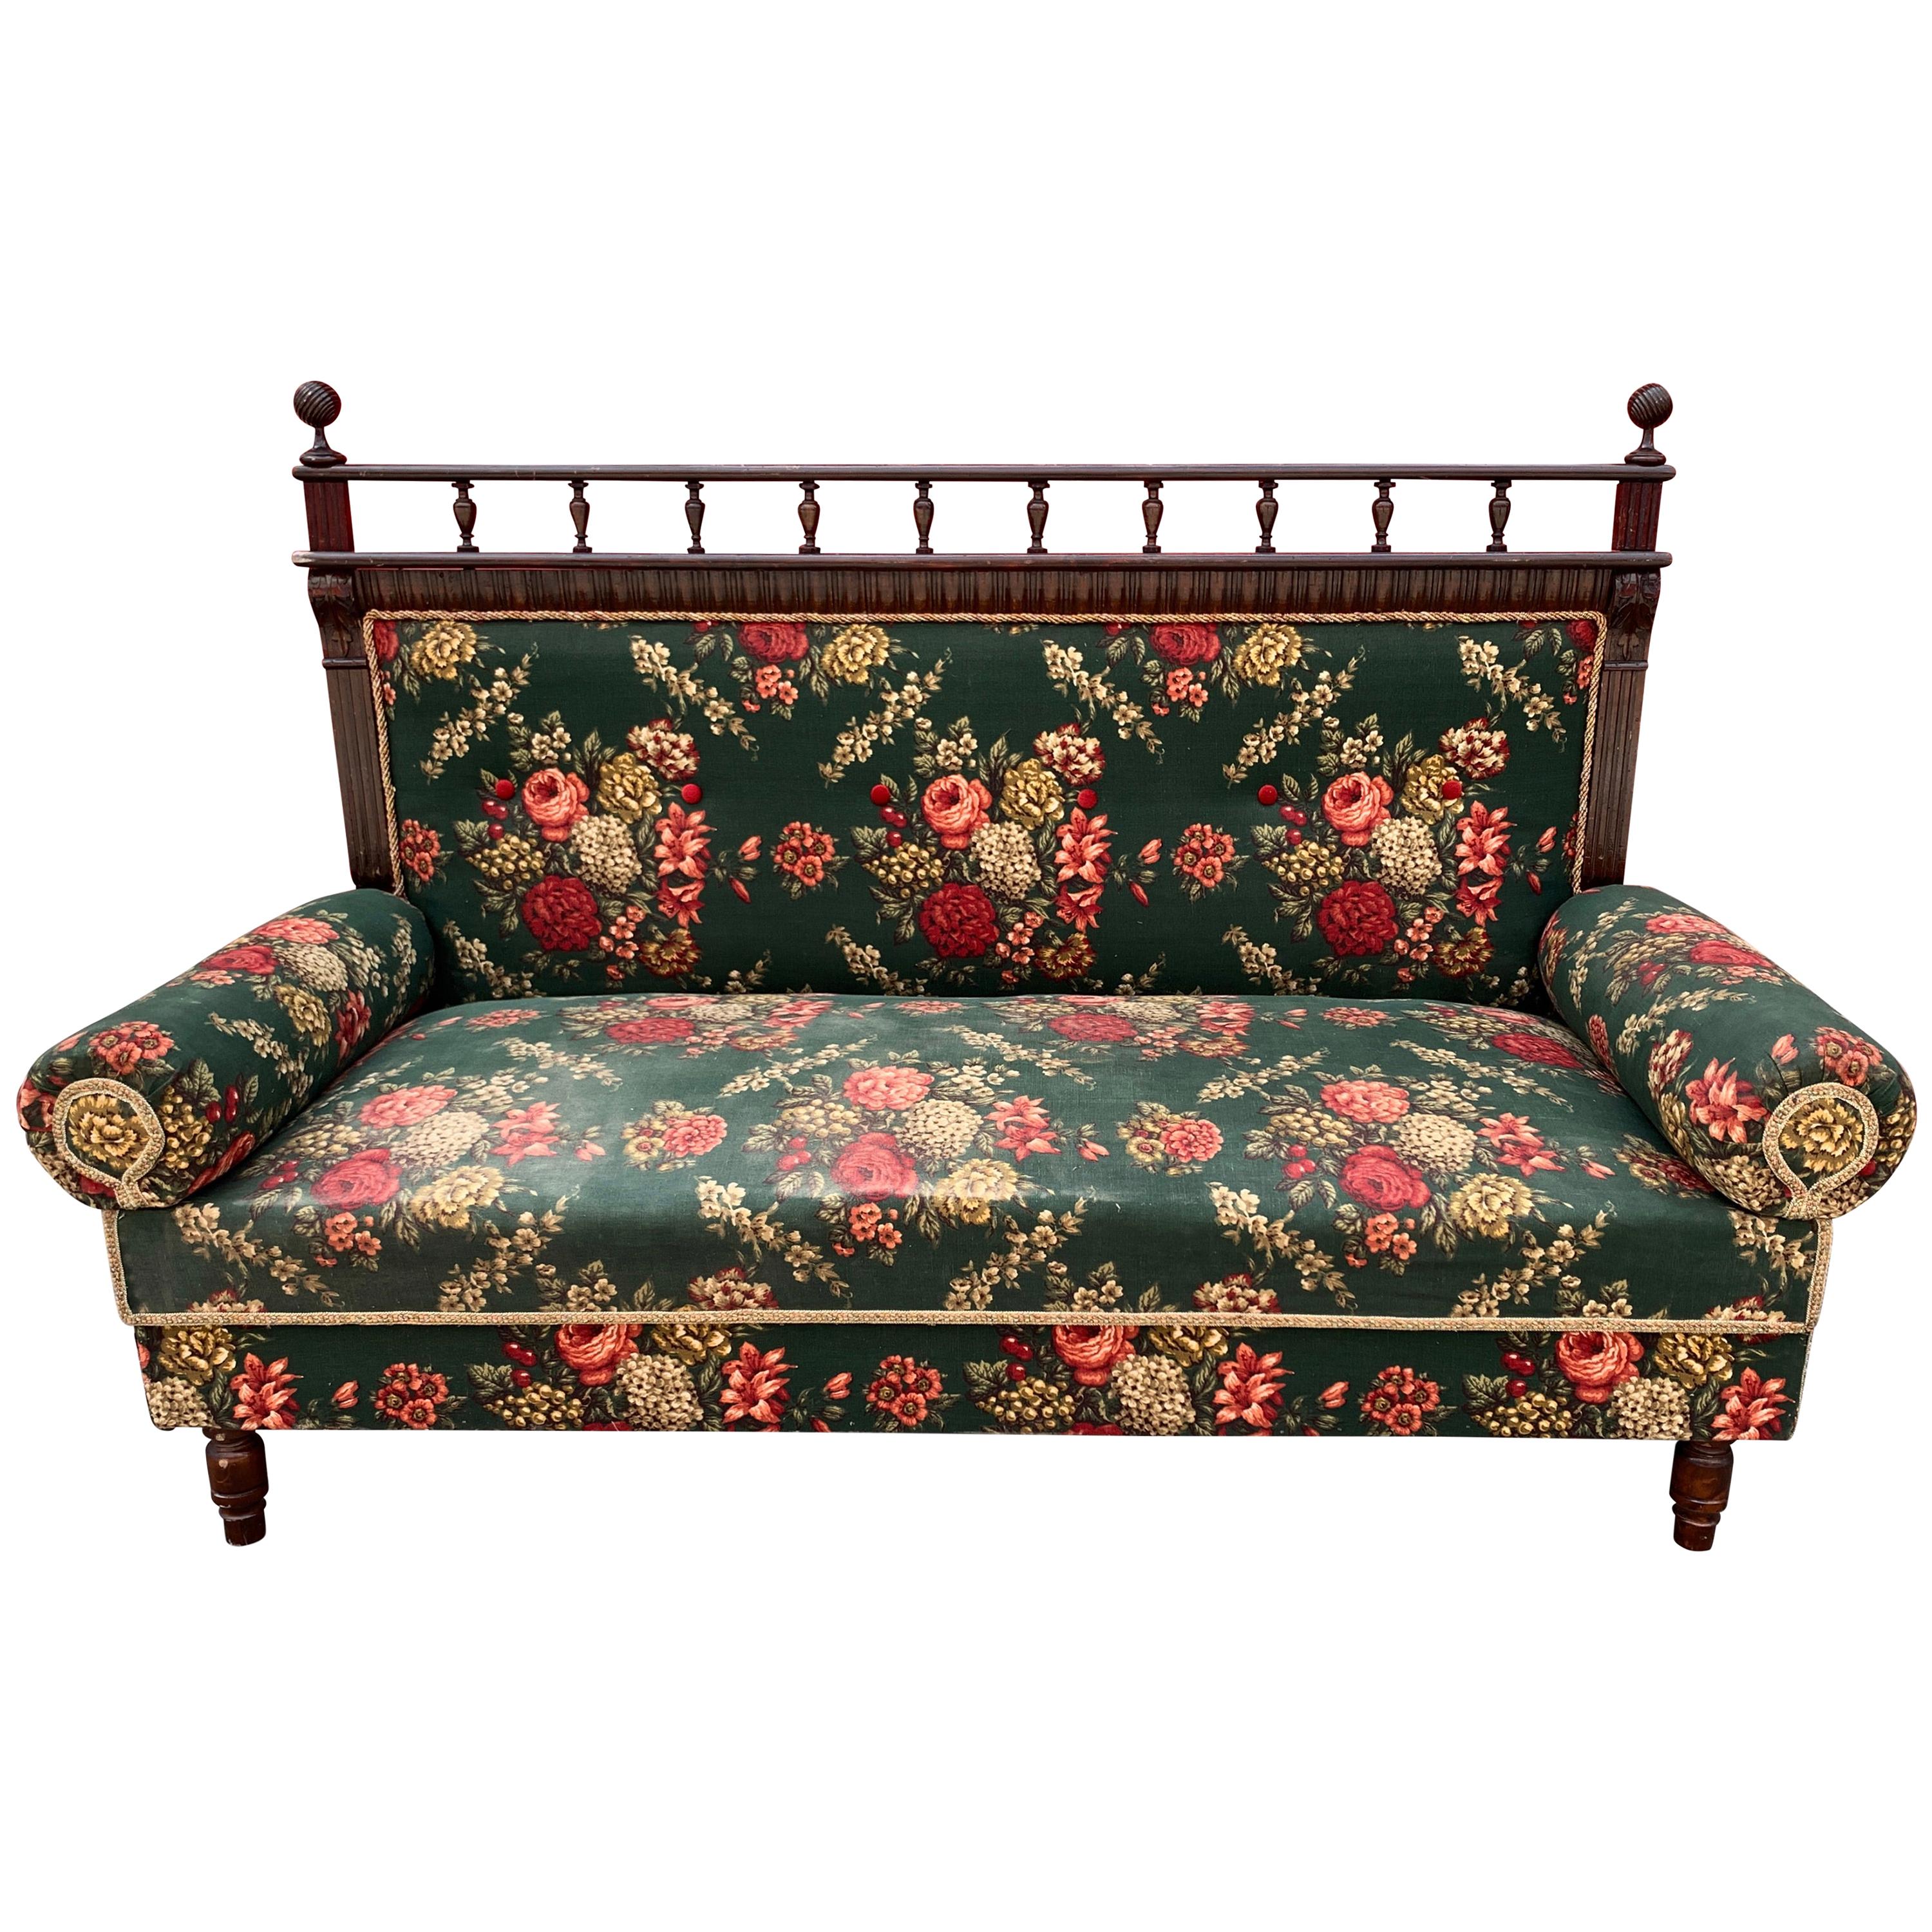 Antique French Green Floral Settee For Sale